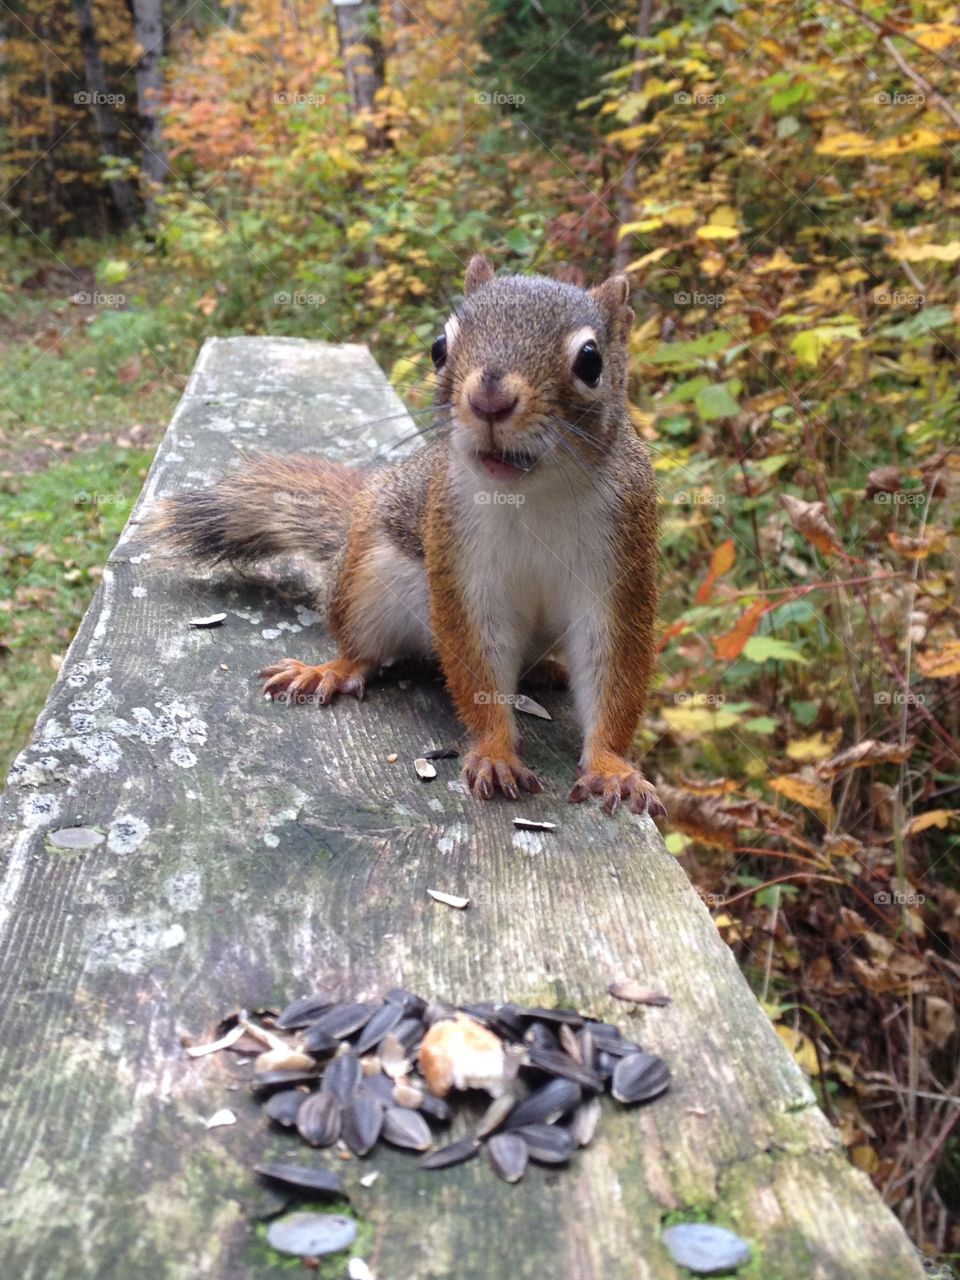 Squirrel eating a sunflower seed on a Fall background. 